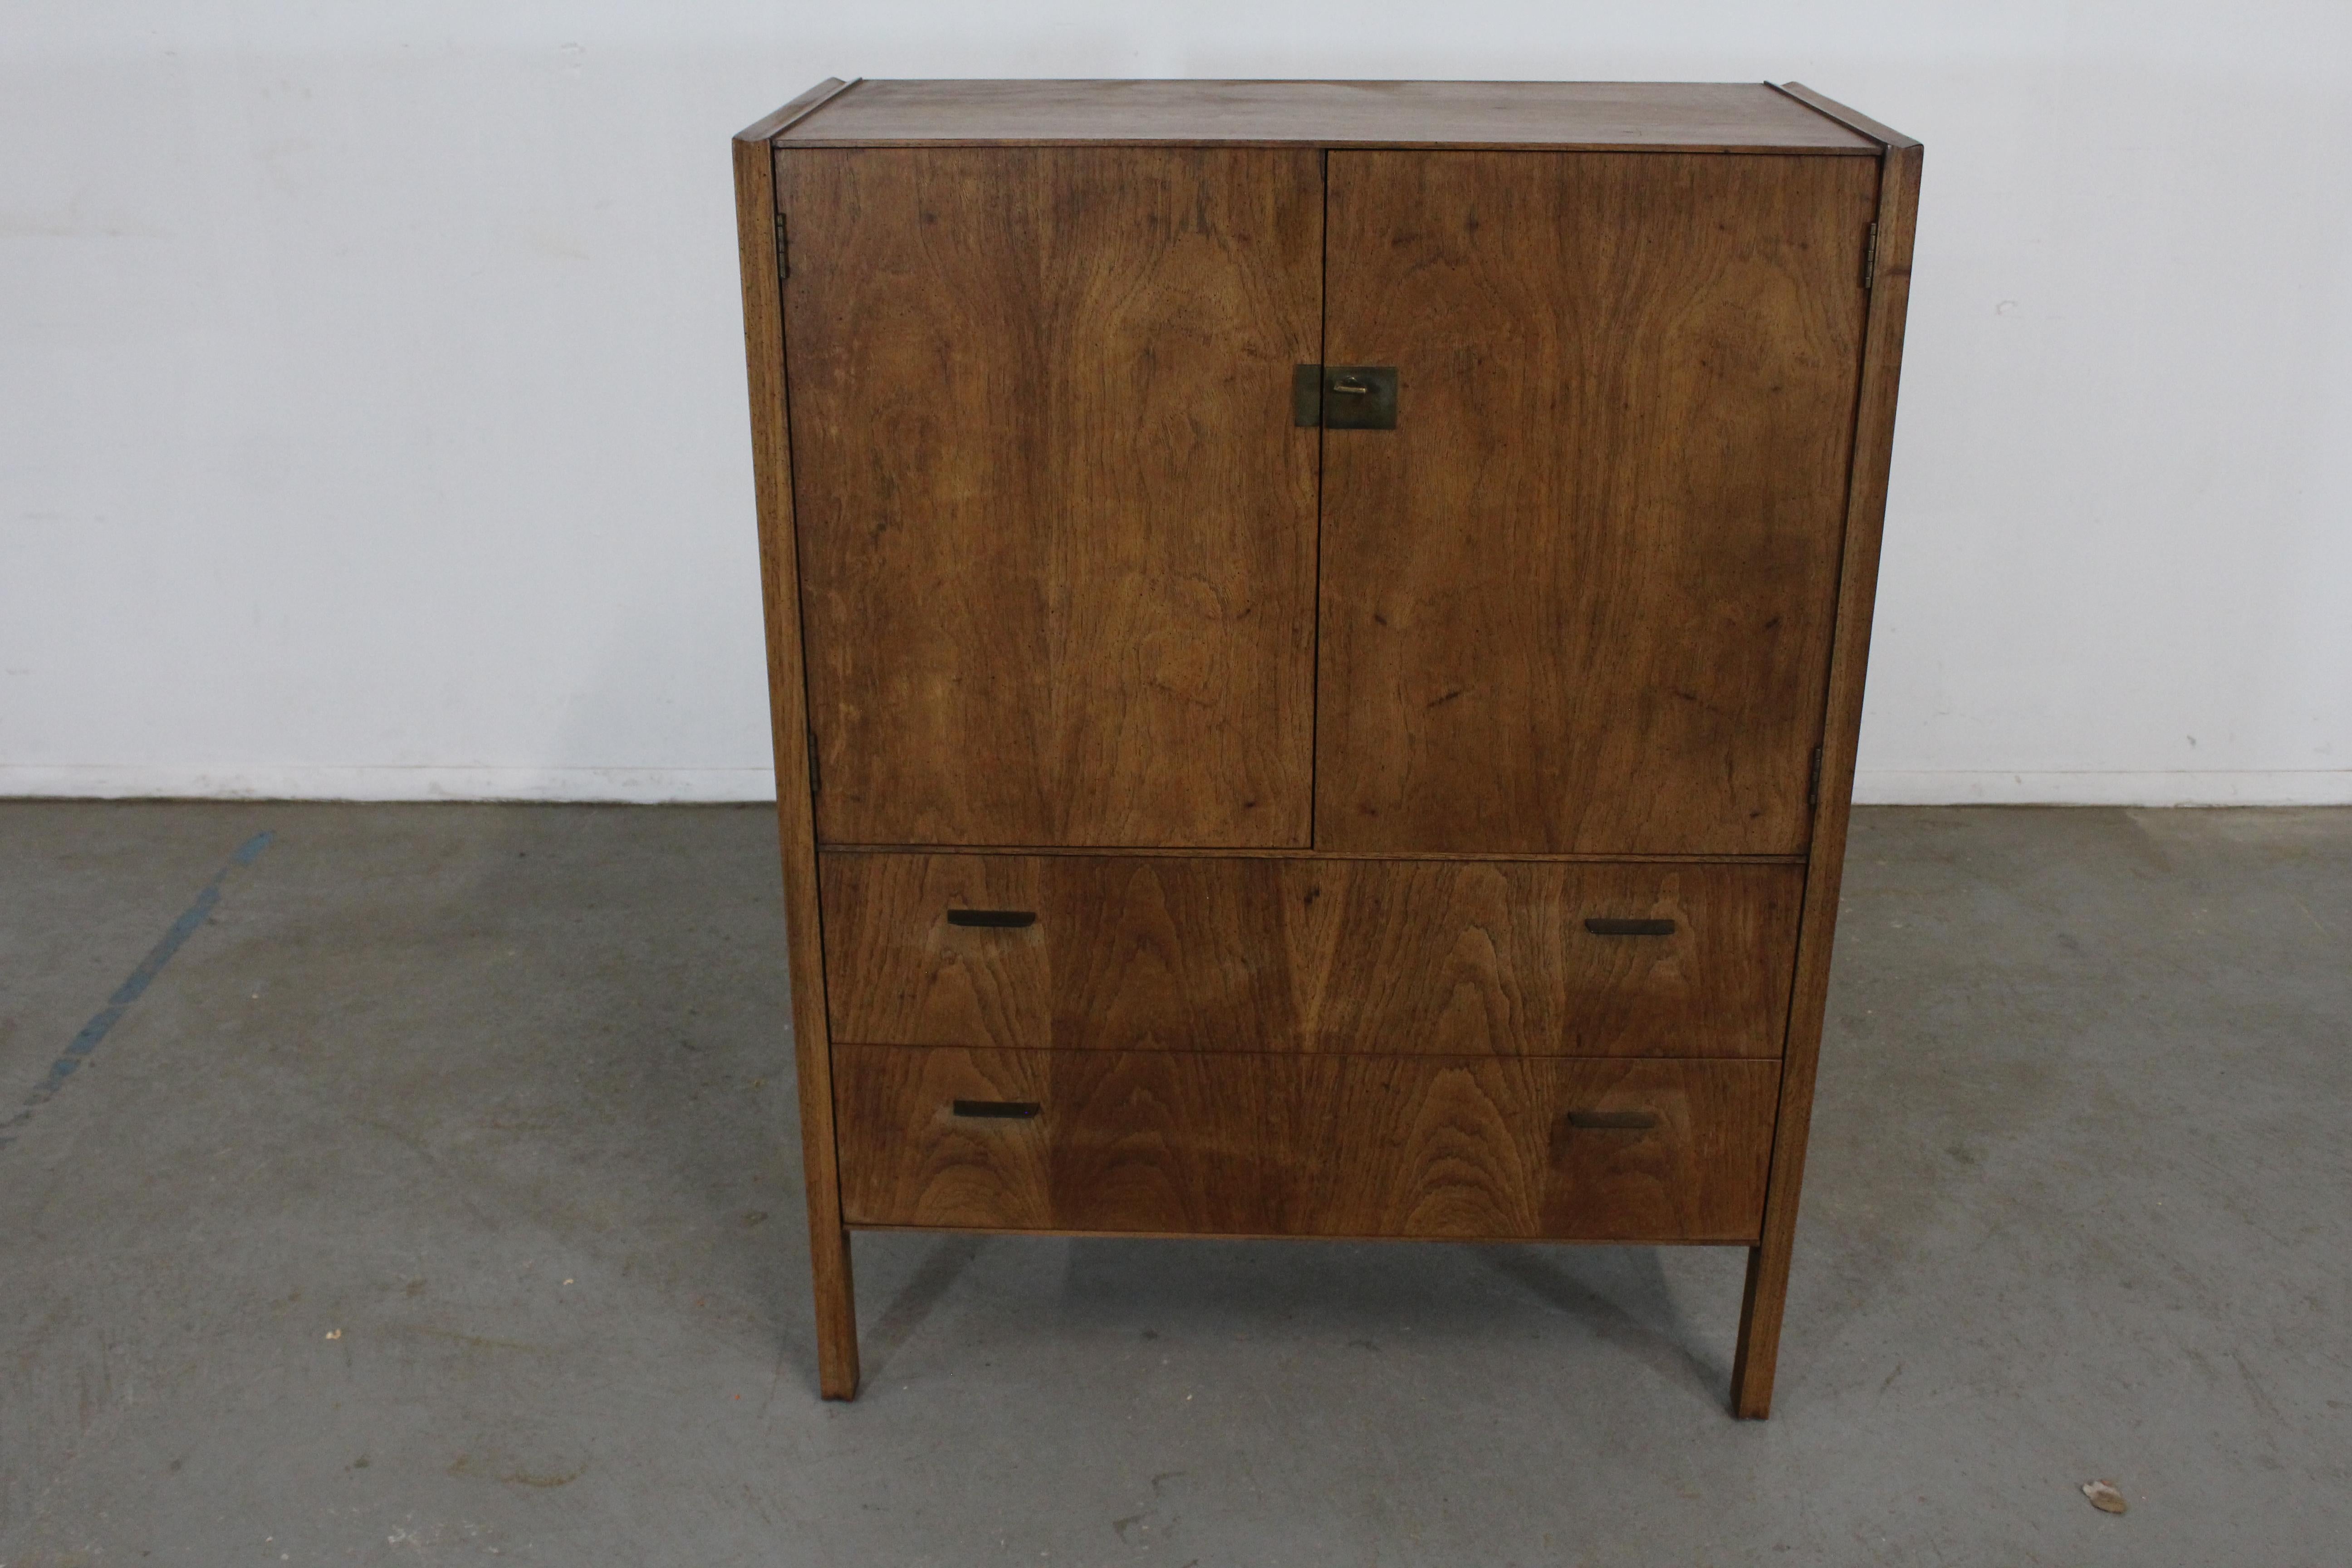 Mid-Century Modern Walnut Gentleman's Tall Chest

Offered is an excellent example of American mid-century modern design; a walnut dresser from the 1960's. Features dovetailed drawers with tapered legs and sculpted pulls. It is in excellent